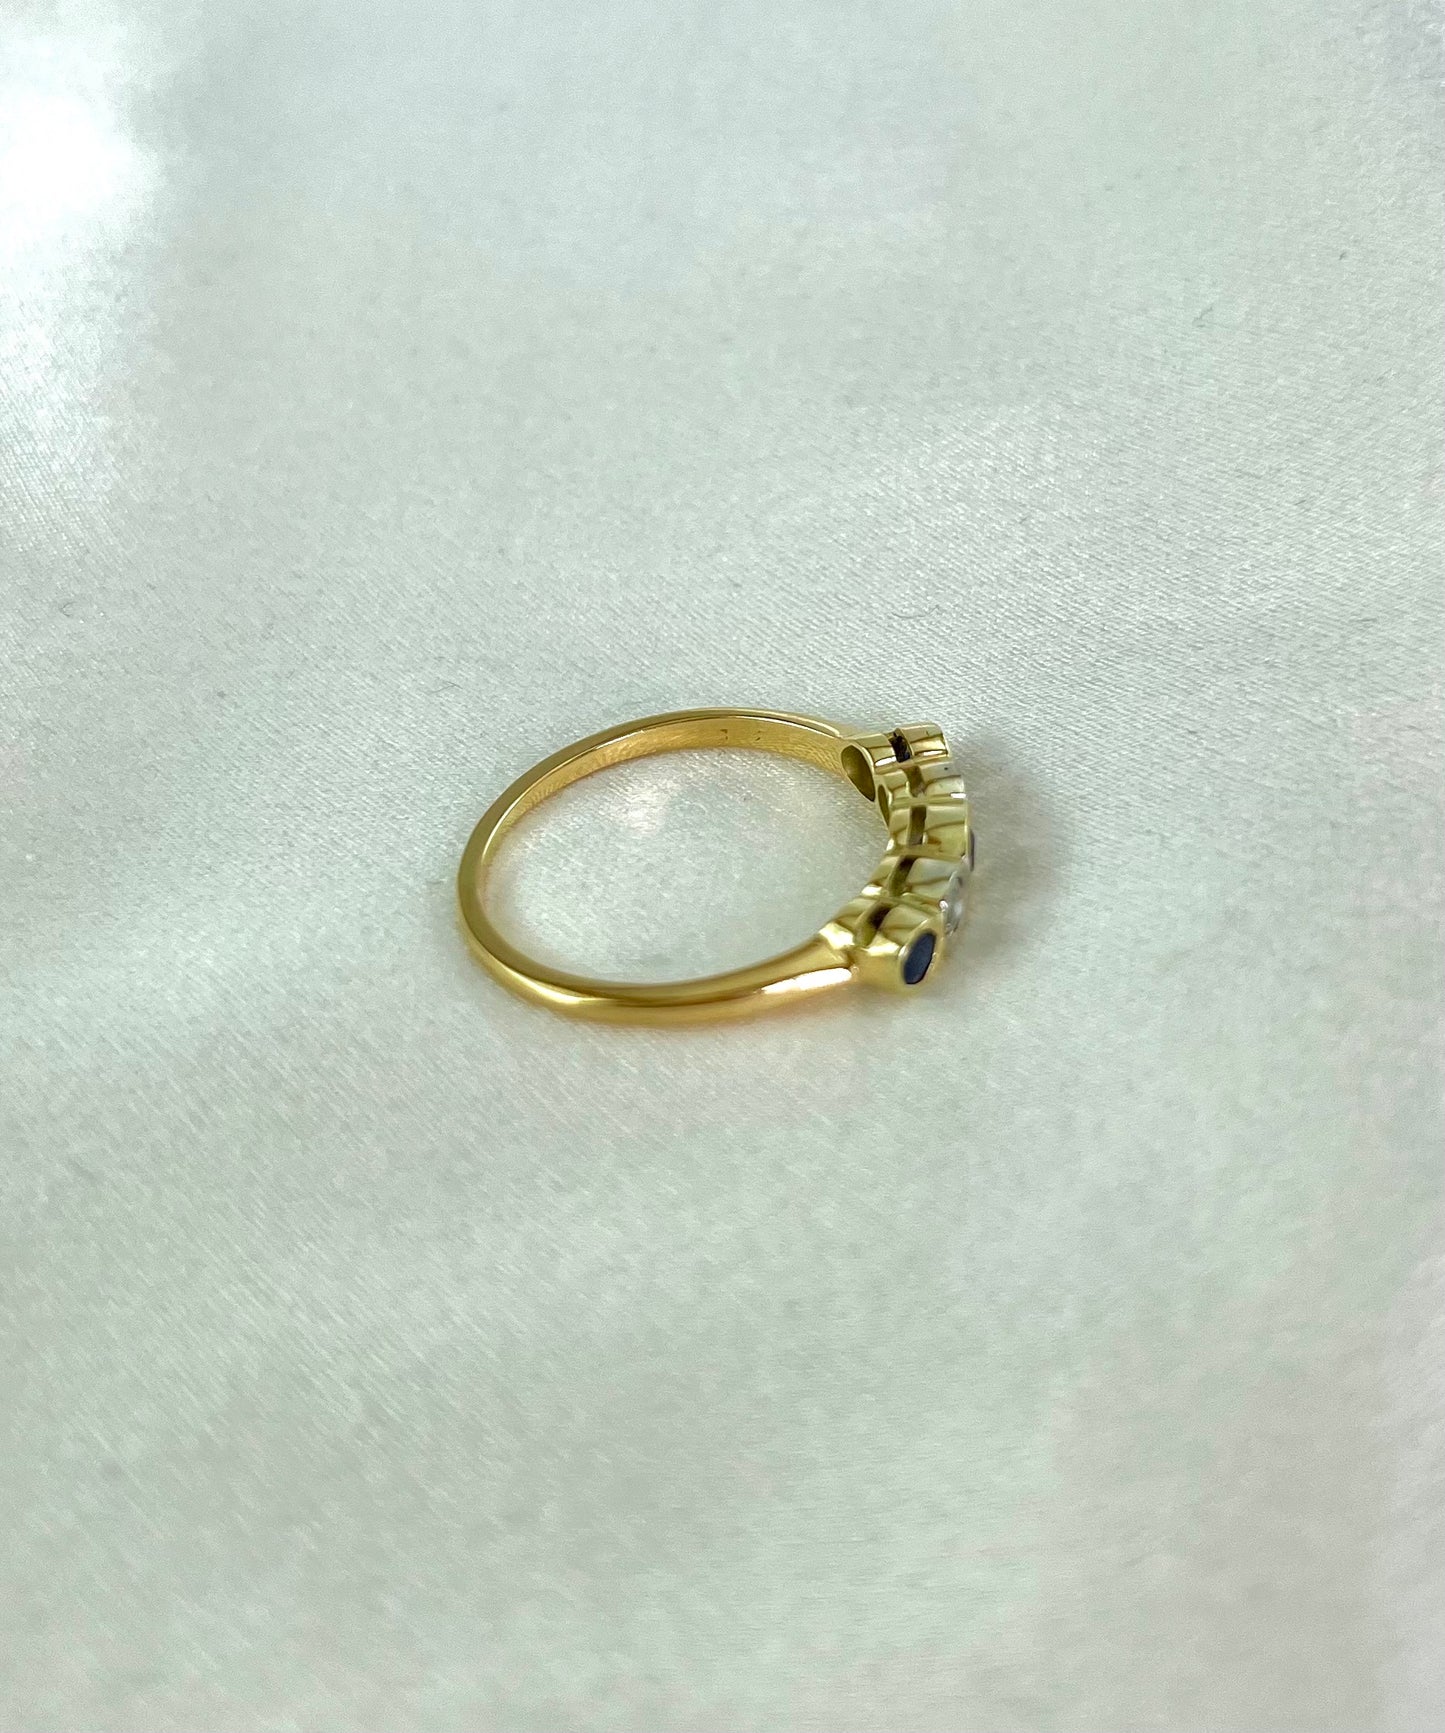 Vintage 18ct Yellow Gold 5 Stone Diamond and Sapphire Ring Size Q, Bezel Setting